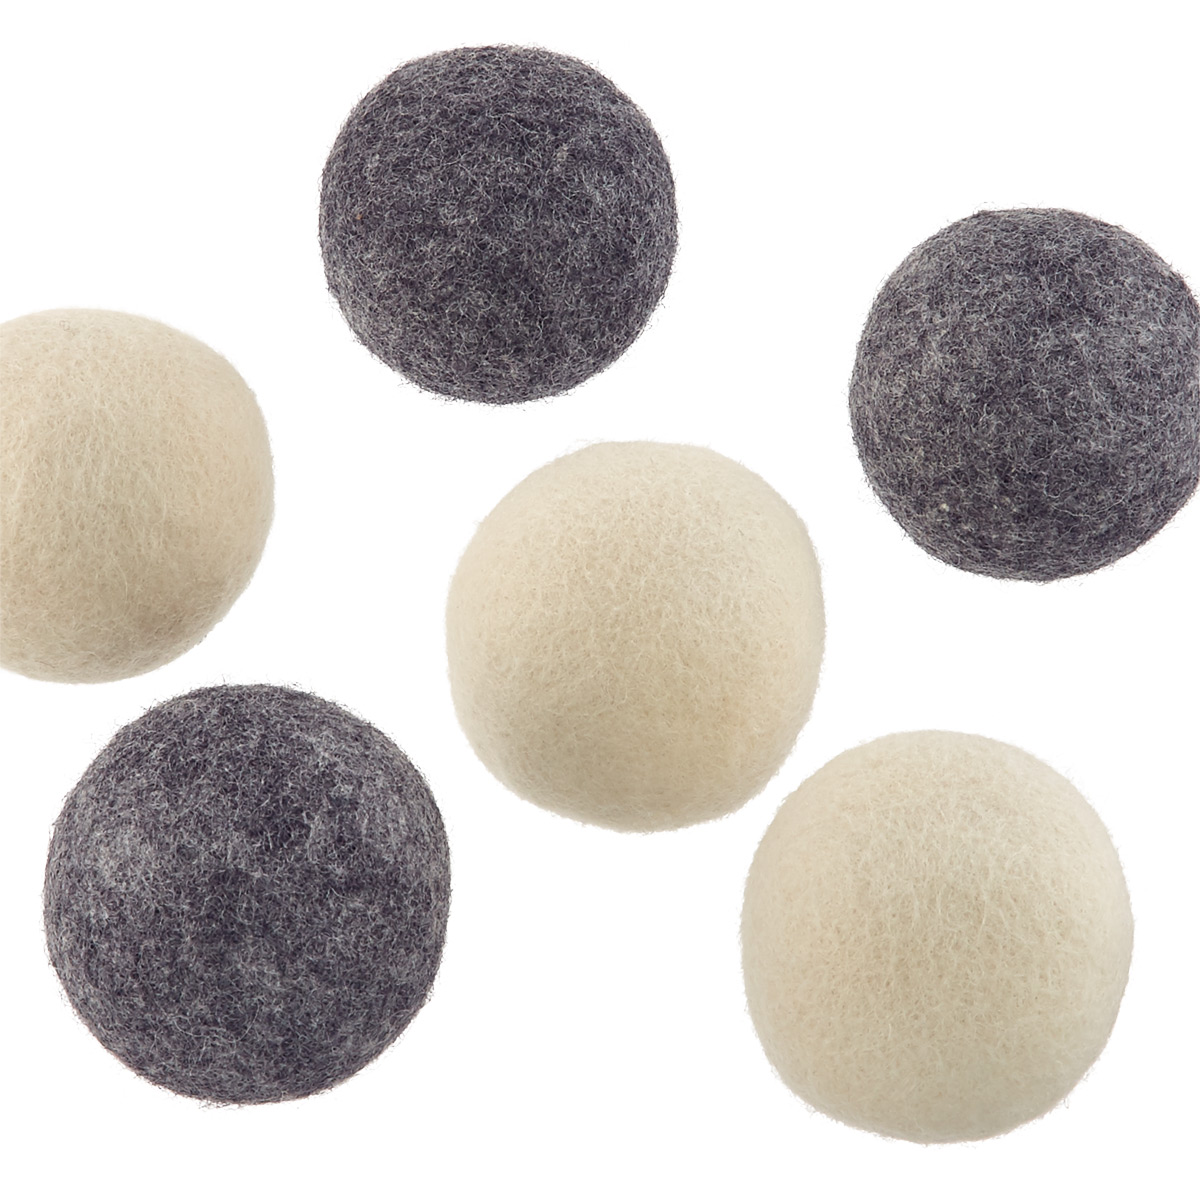 by　Three　Wool　Container　Store　Three　Balls　Dryer　The